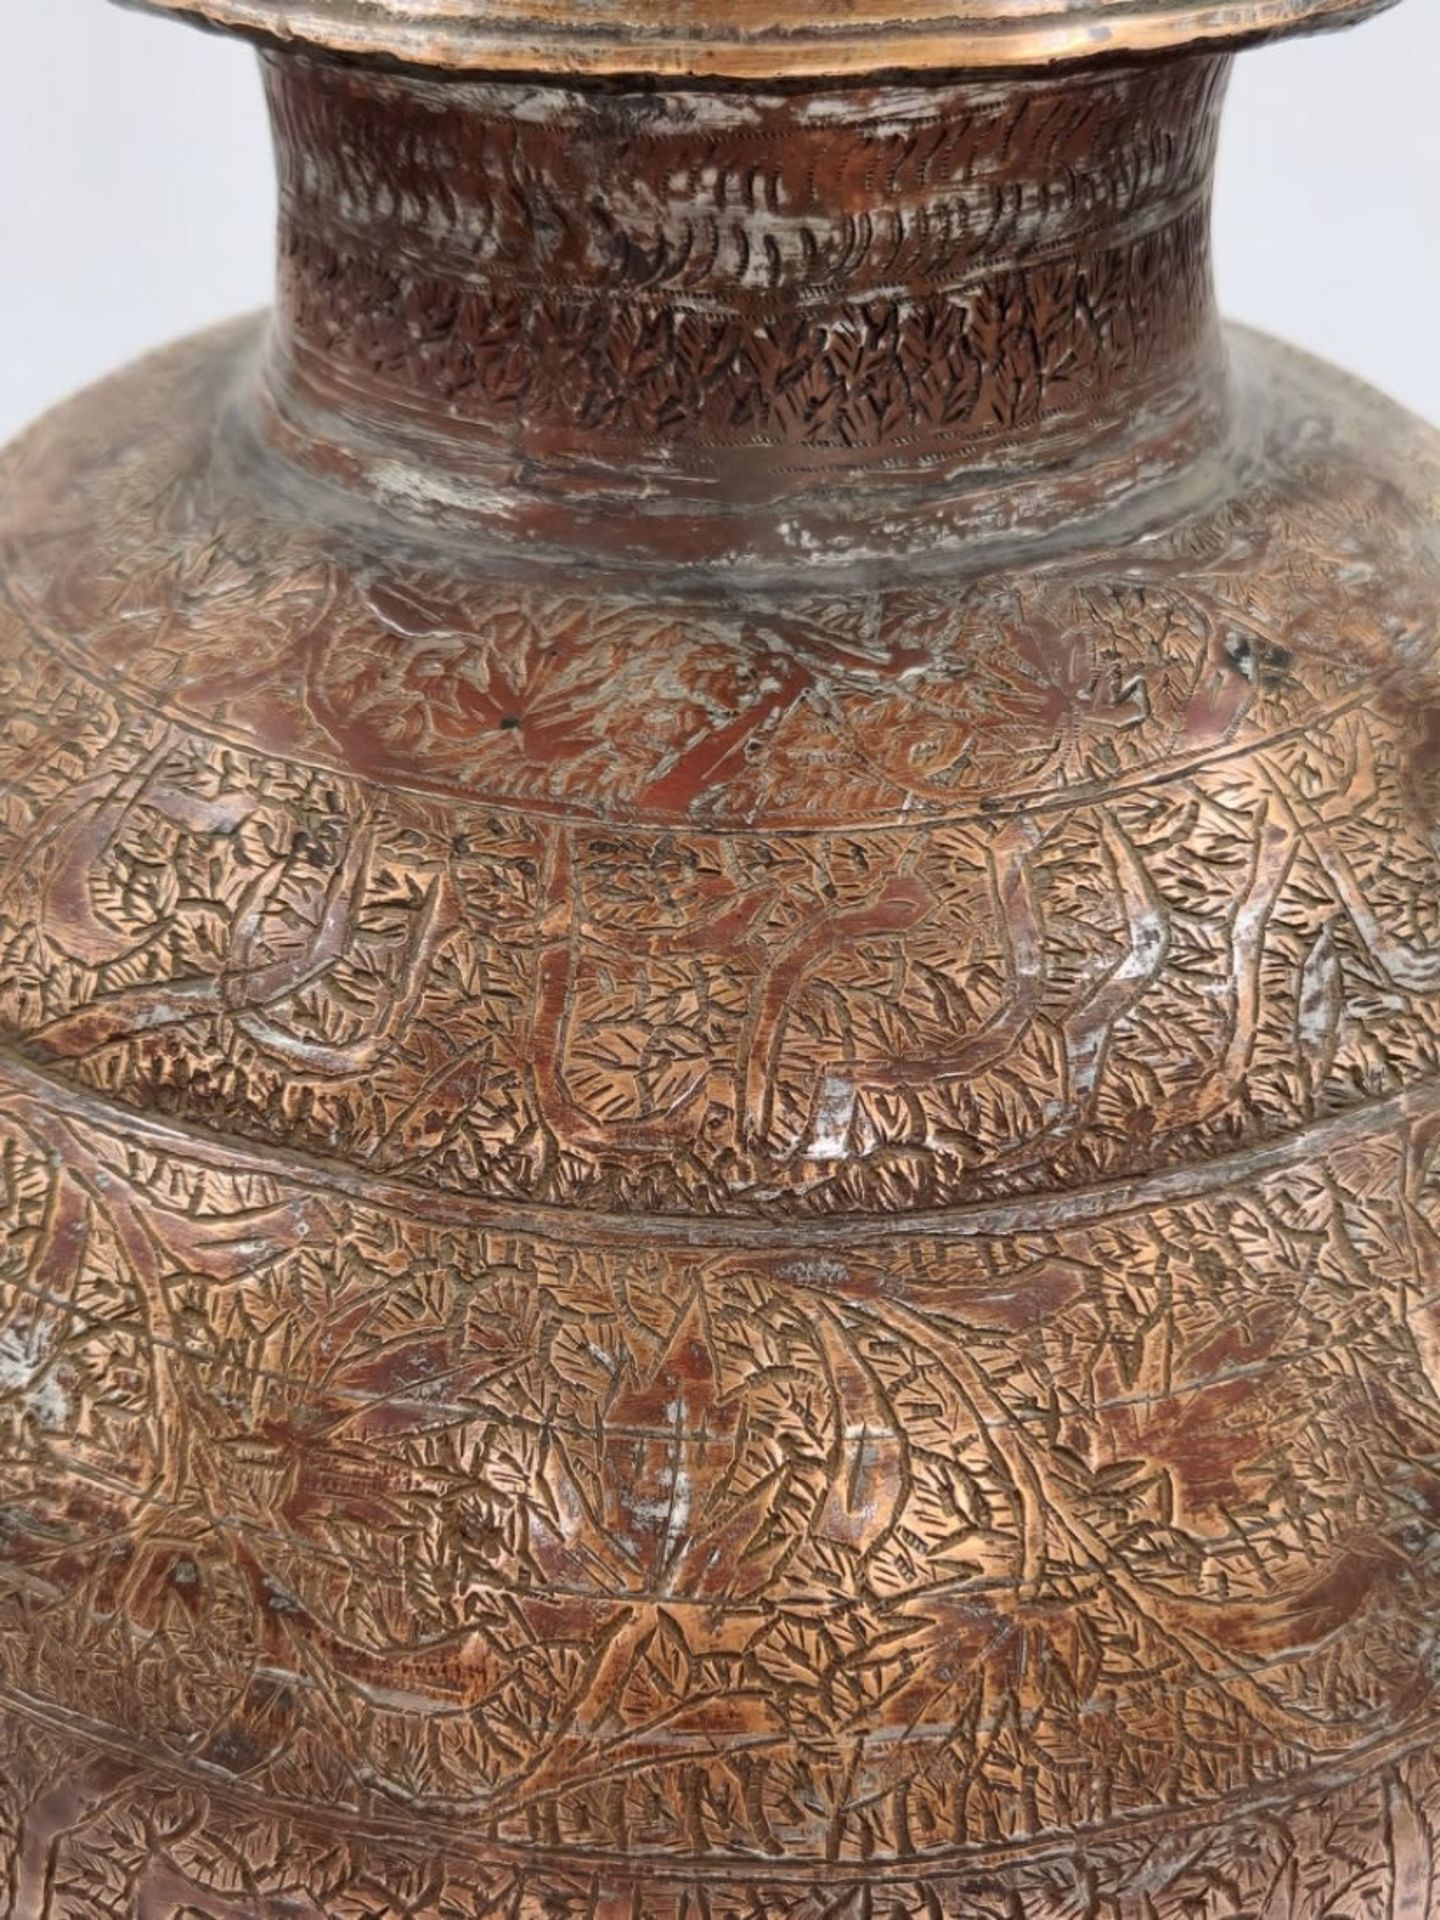 A large and beautiful antique Asian water jug from the 19th century, made in the Dhamrai region, - Image 6 of 8